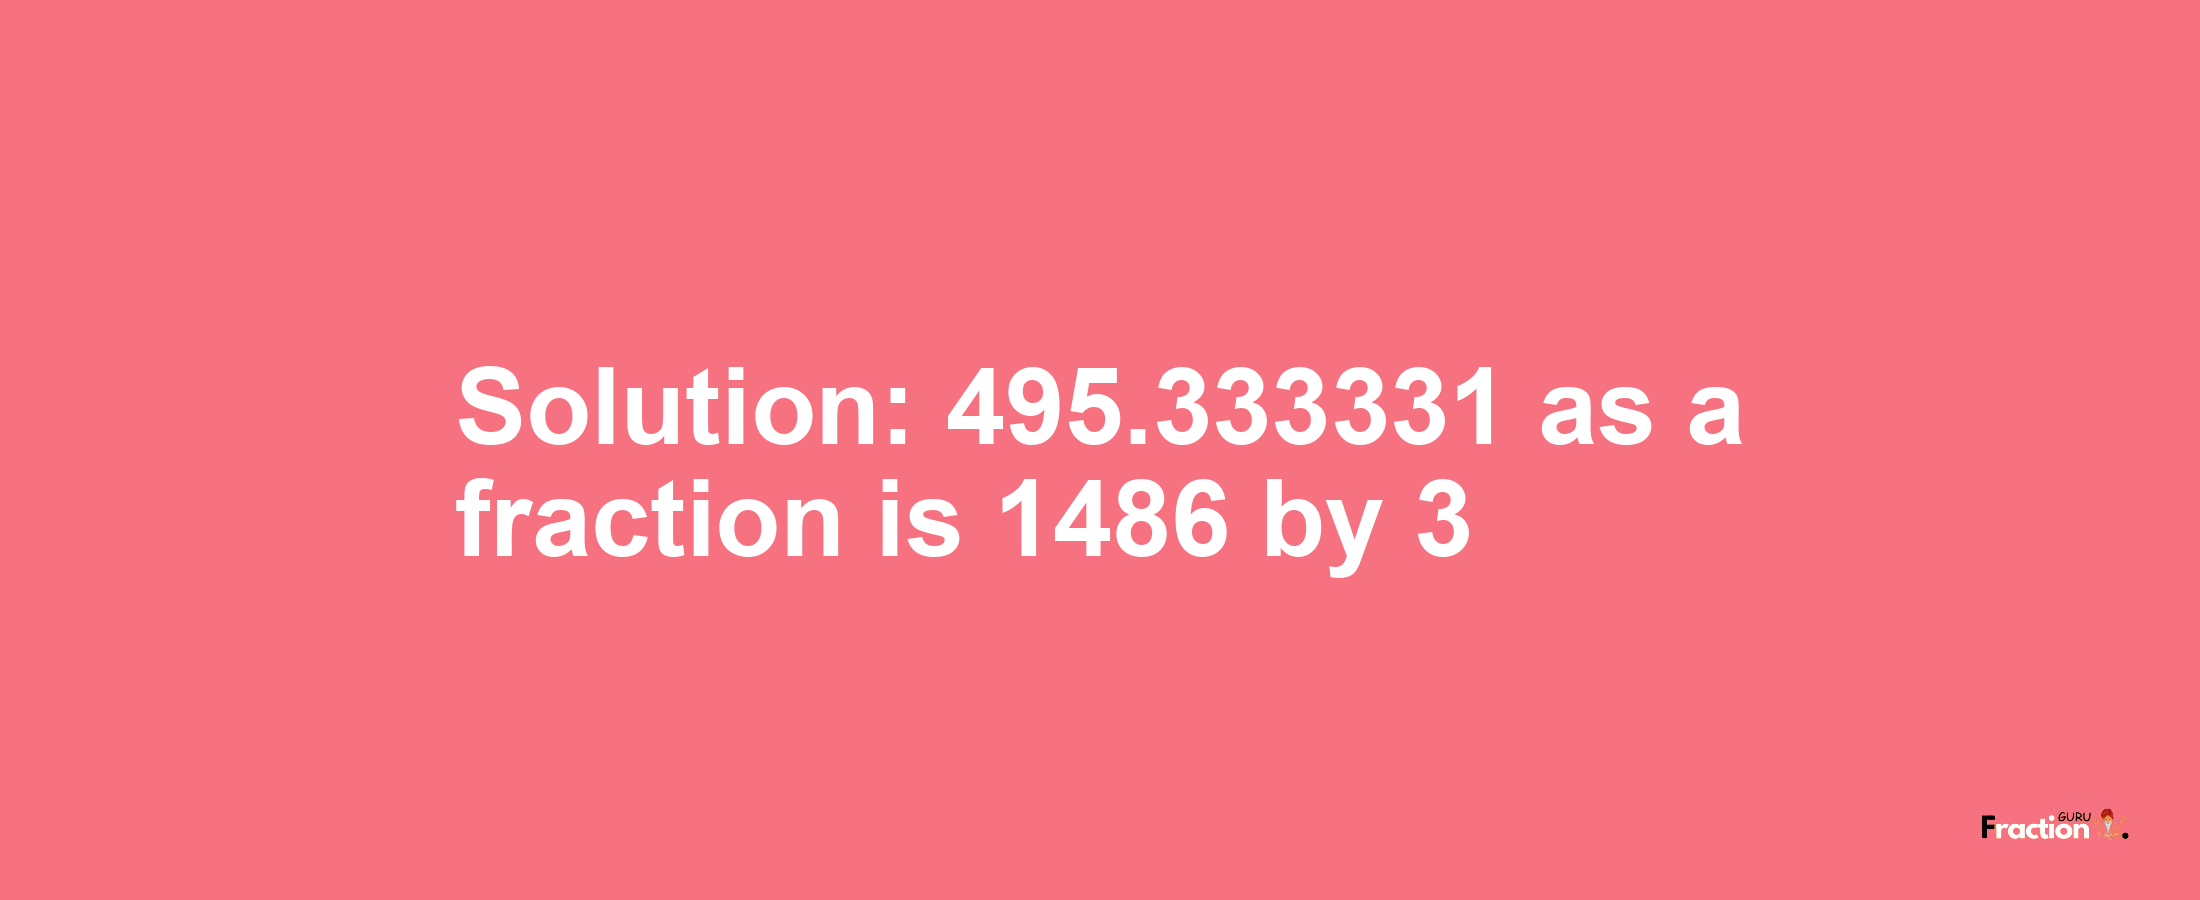 Solution:495.333331 as a fraction is 1486/3